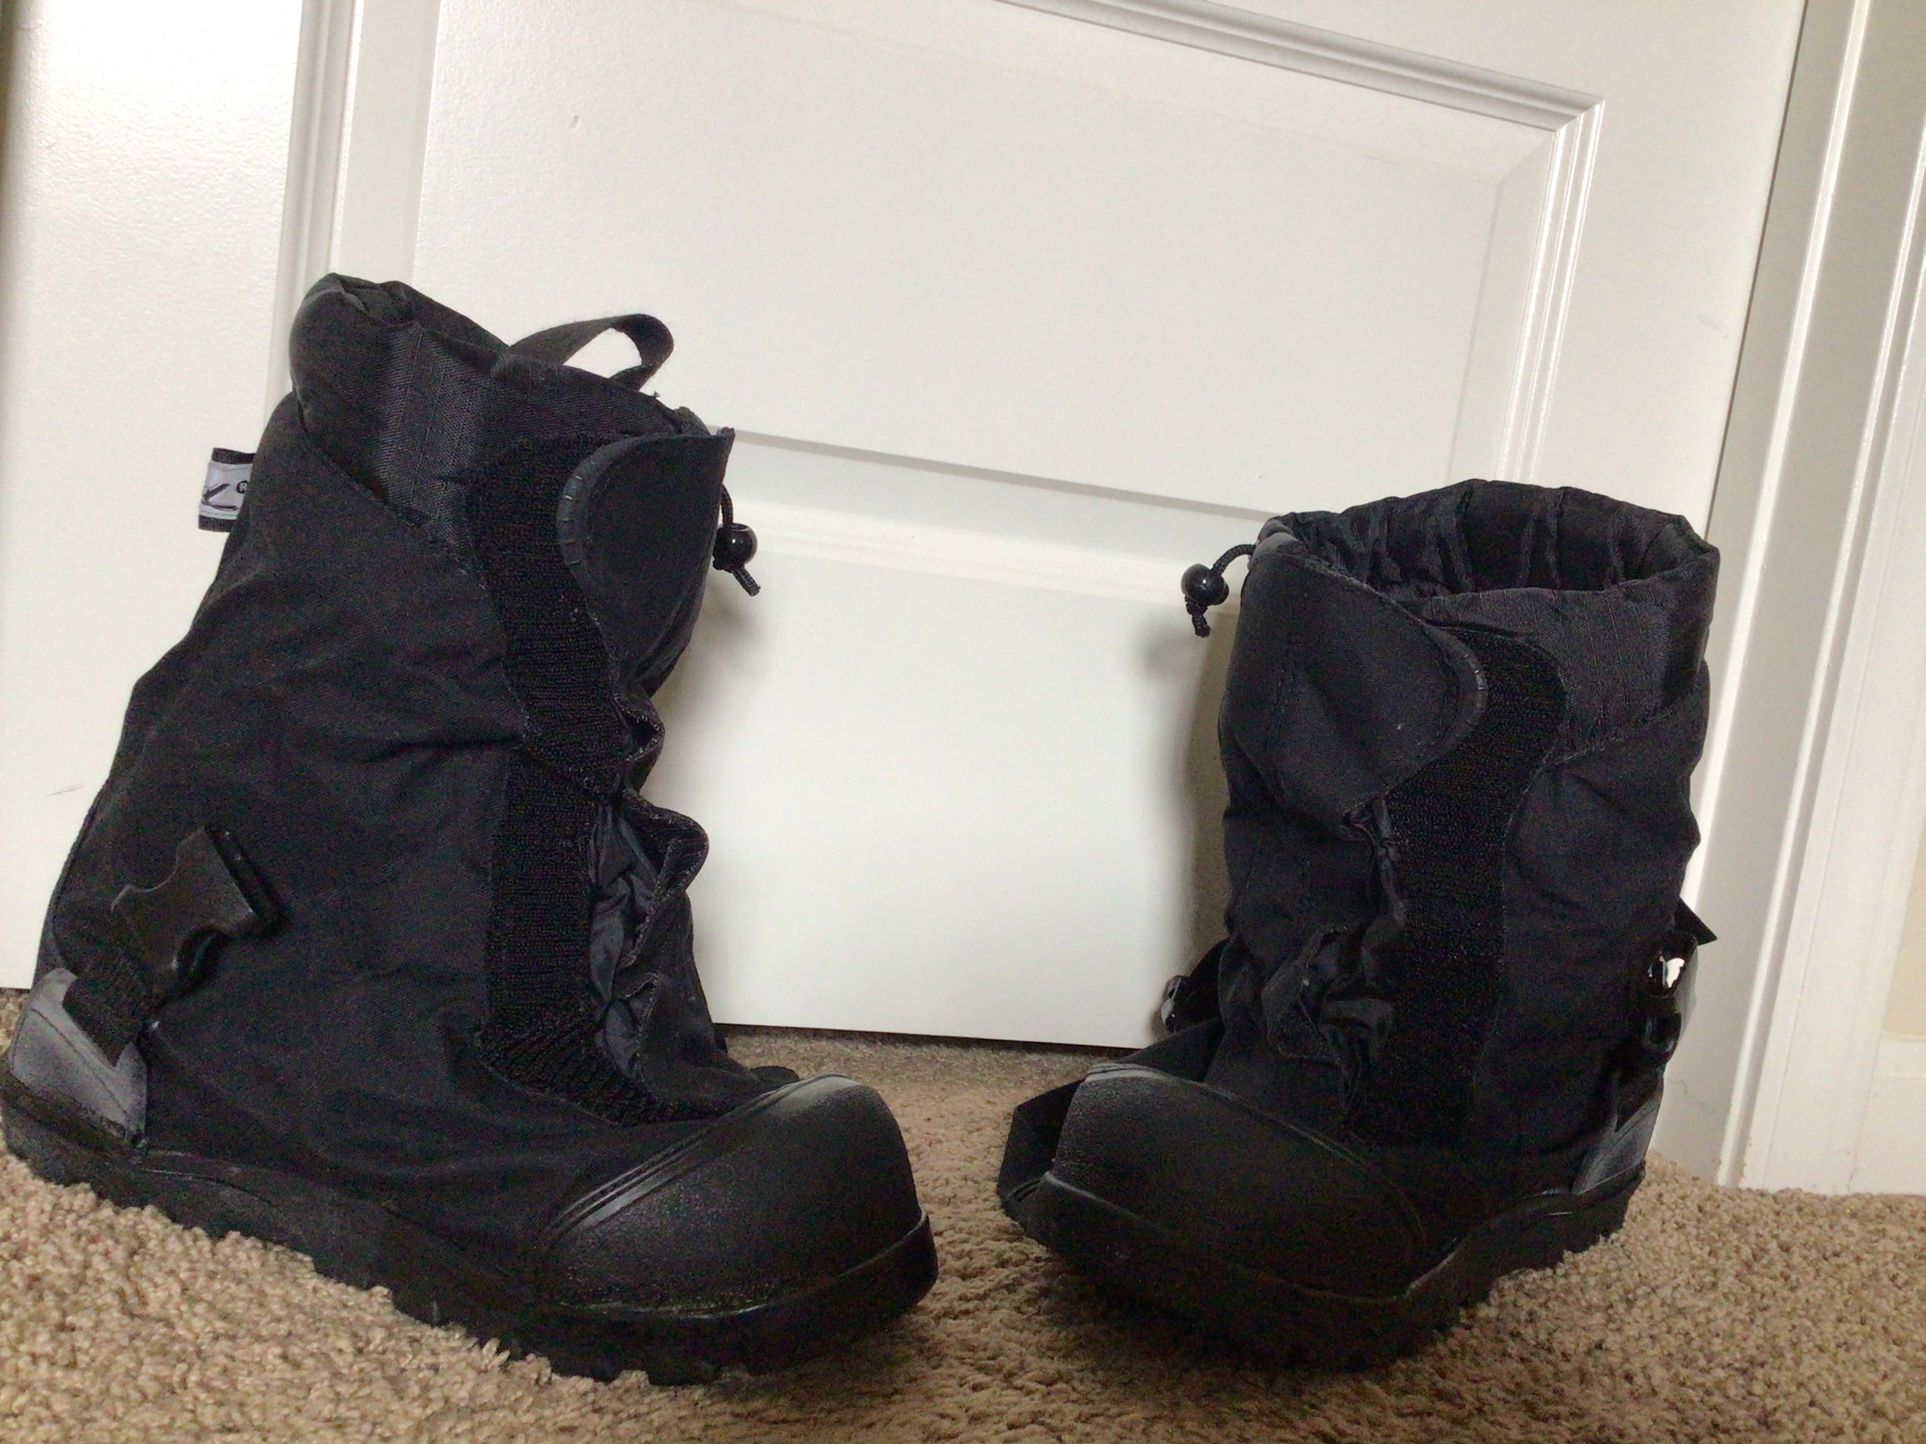 WATER PROOF BOOTS